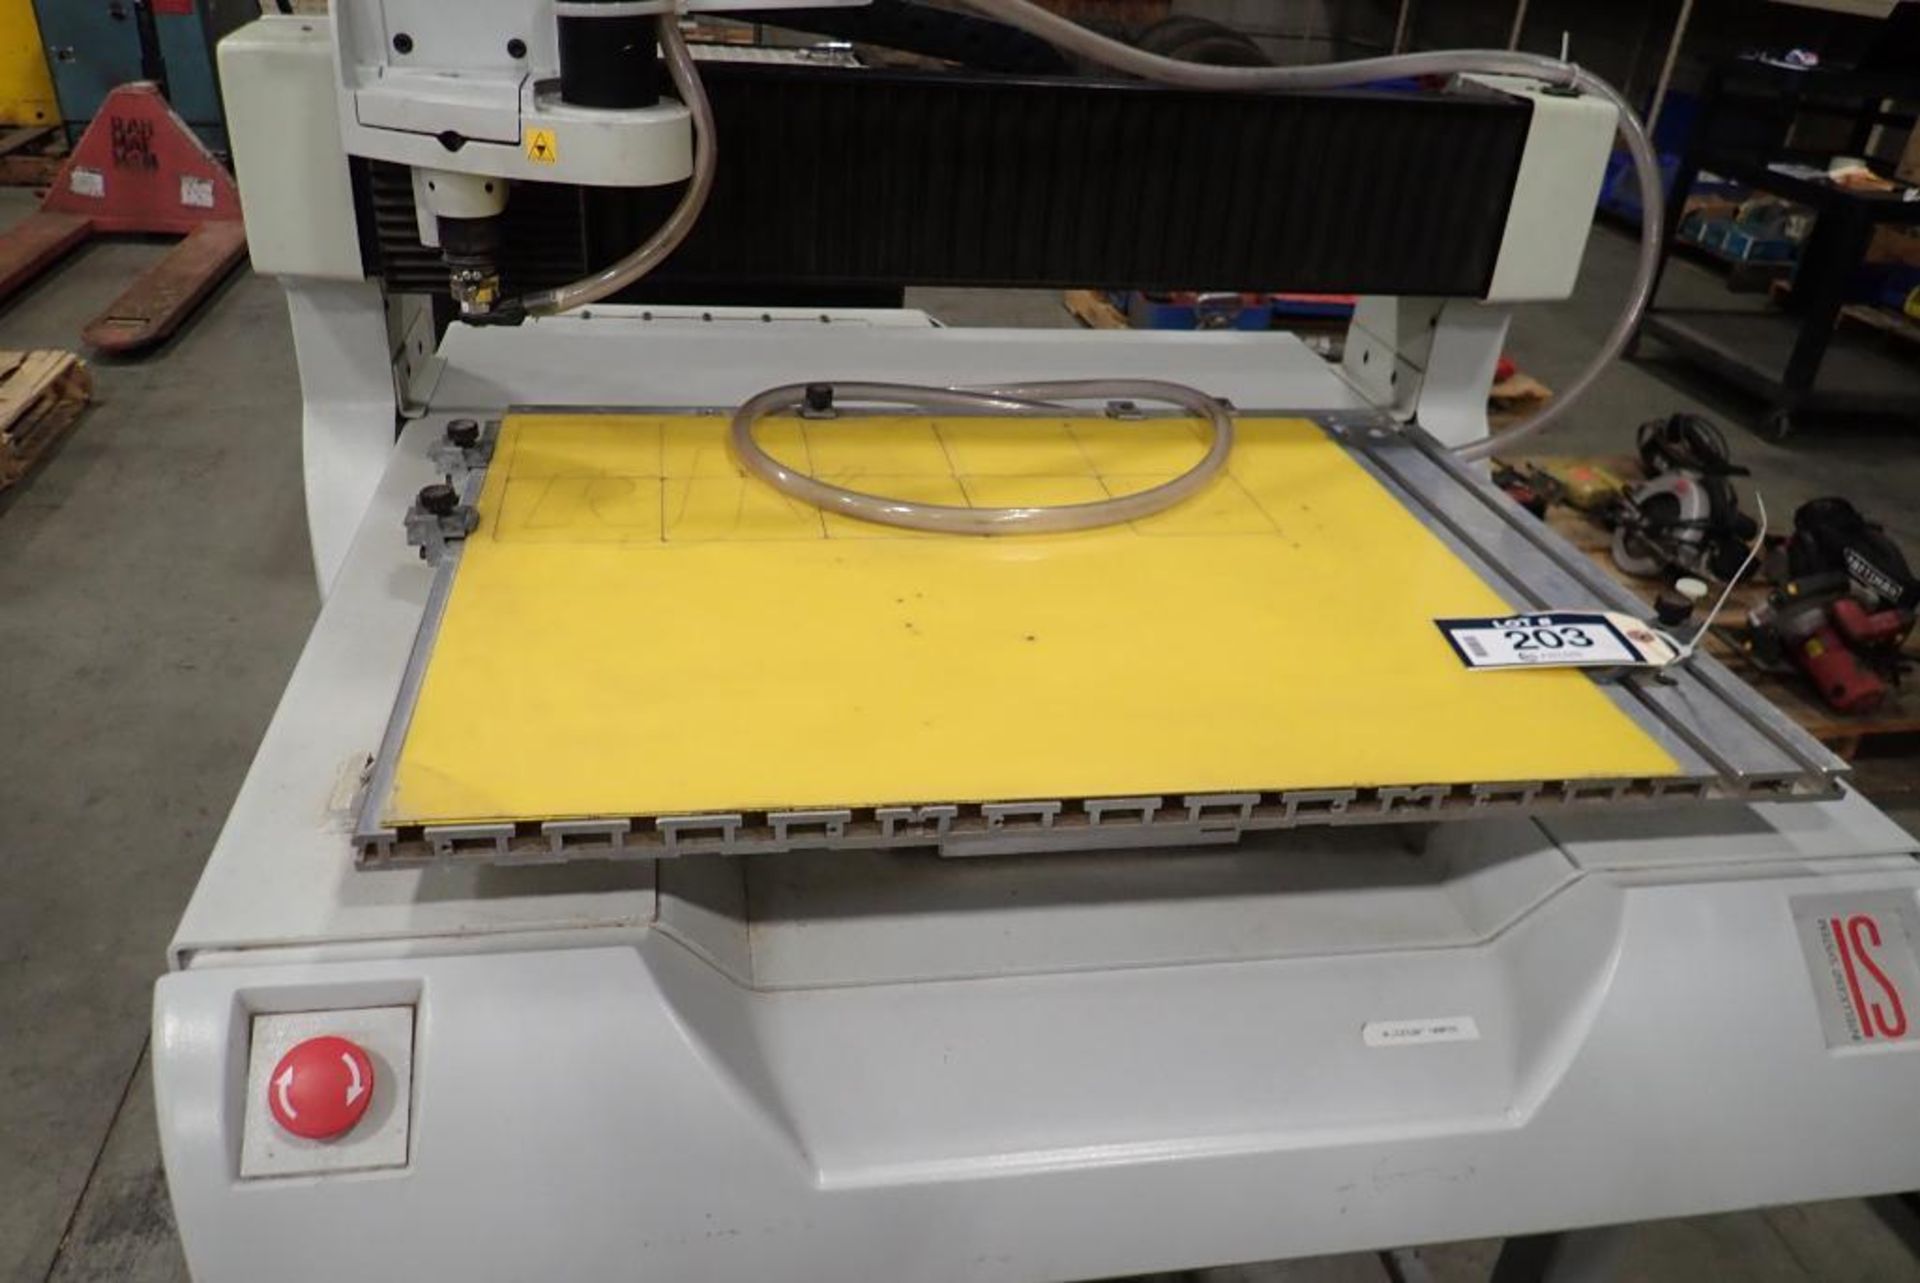 2006 Hermes Gravograph IS6000 Engraving Machine w/ Asst. Accessories, etc. - Image 2 of 6